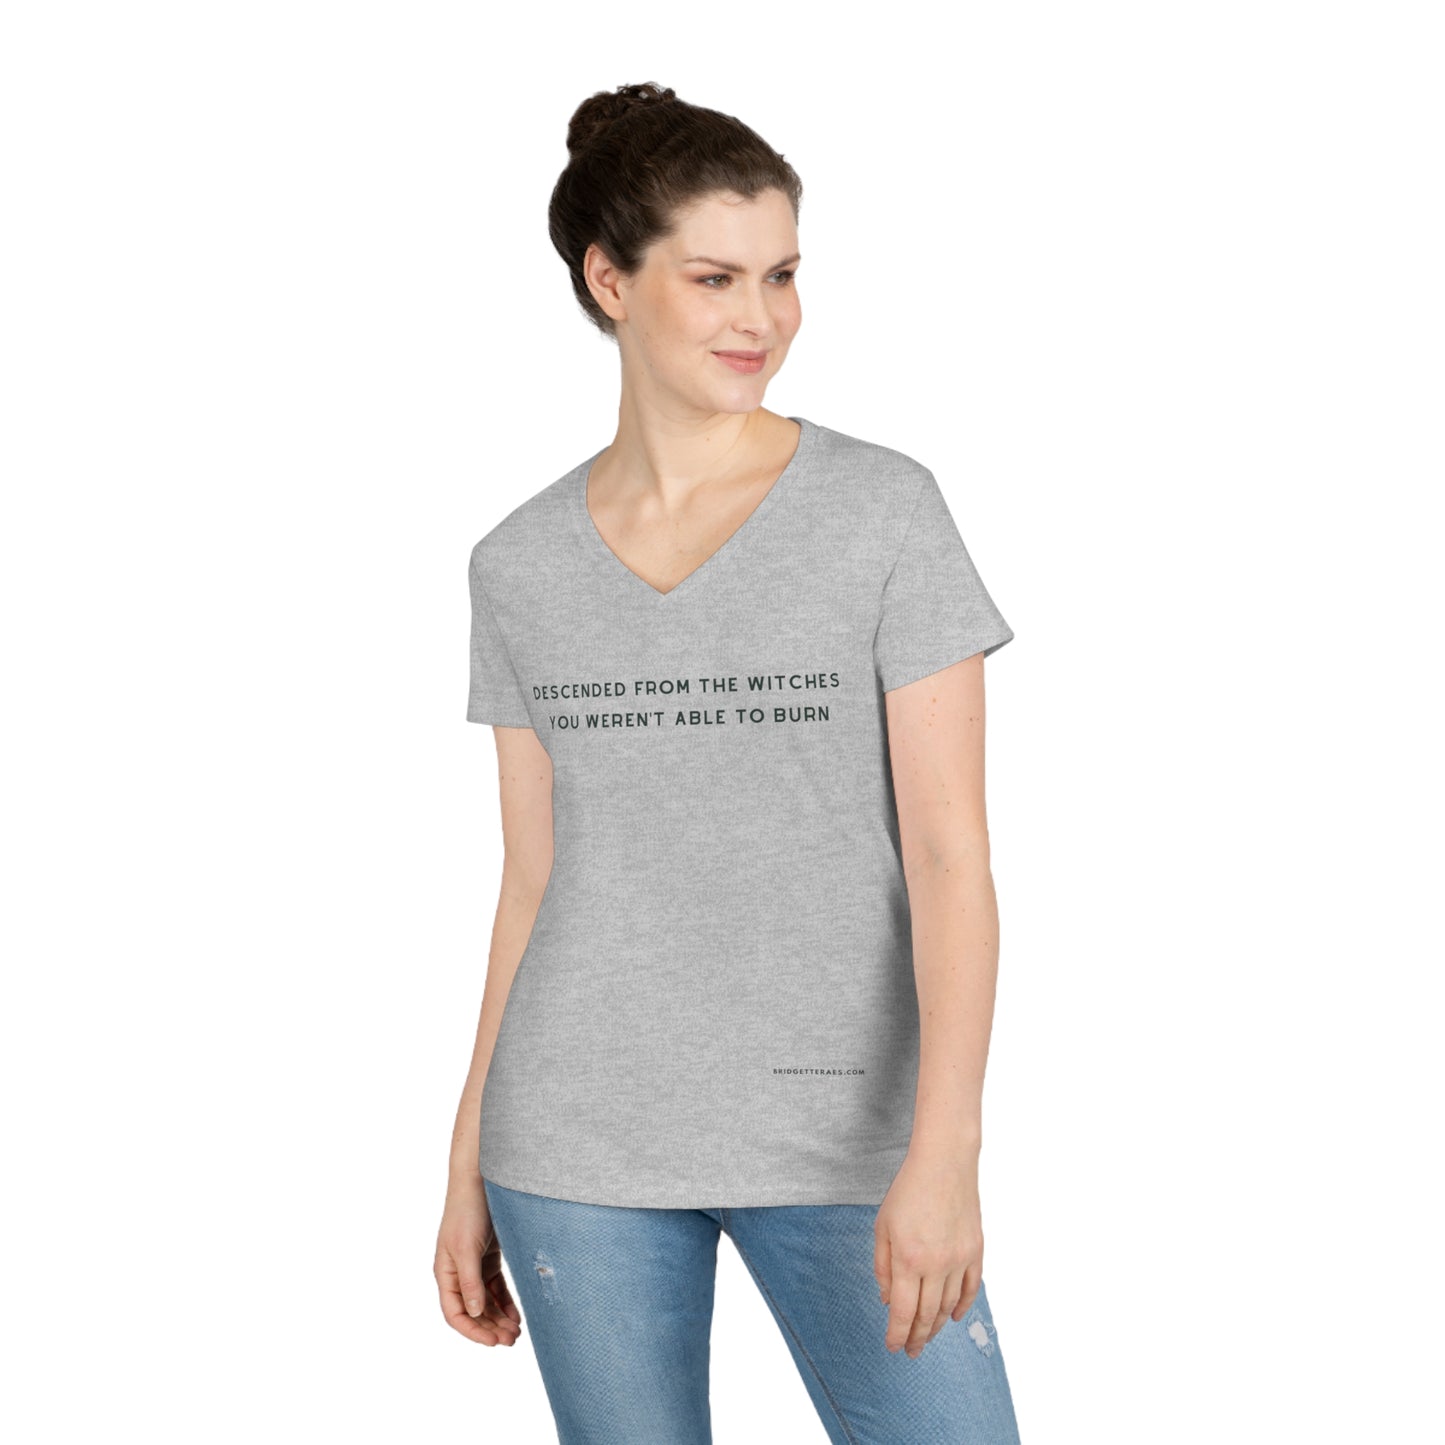 Descended From Witches You Weren't Able to Burn 100% Cotton V-Neck T-Shirt